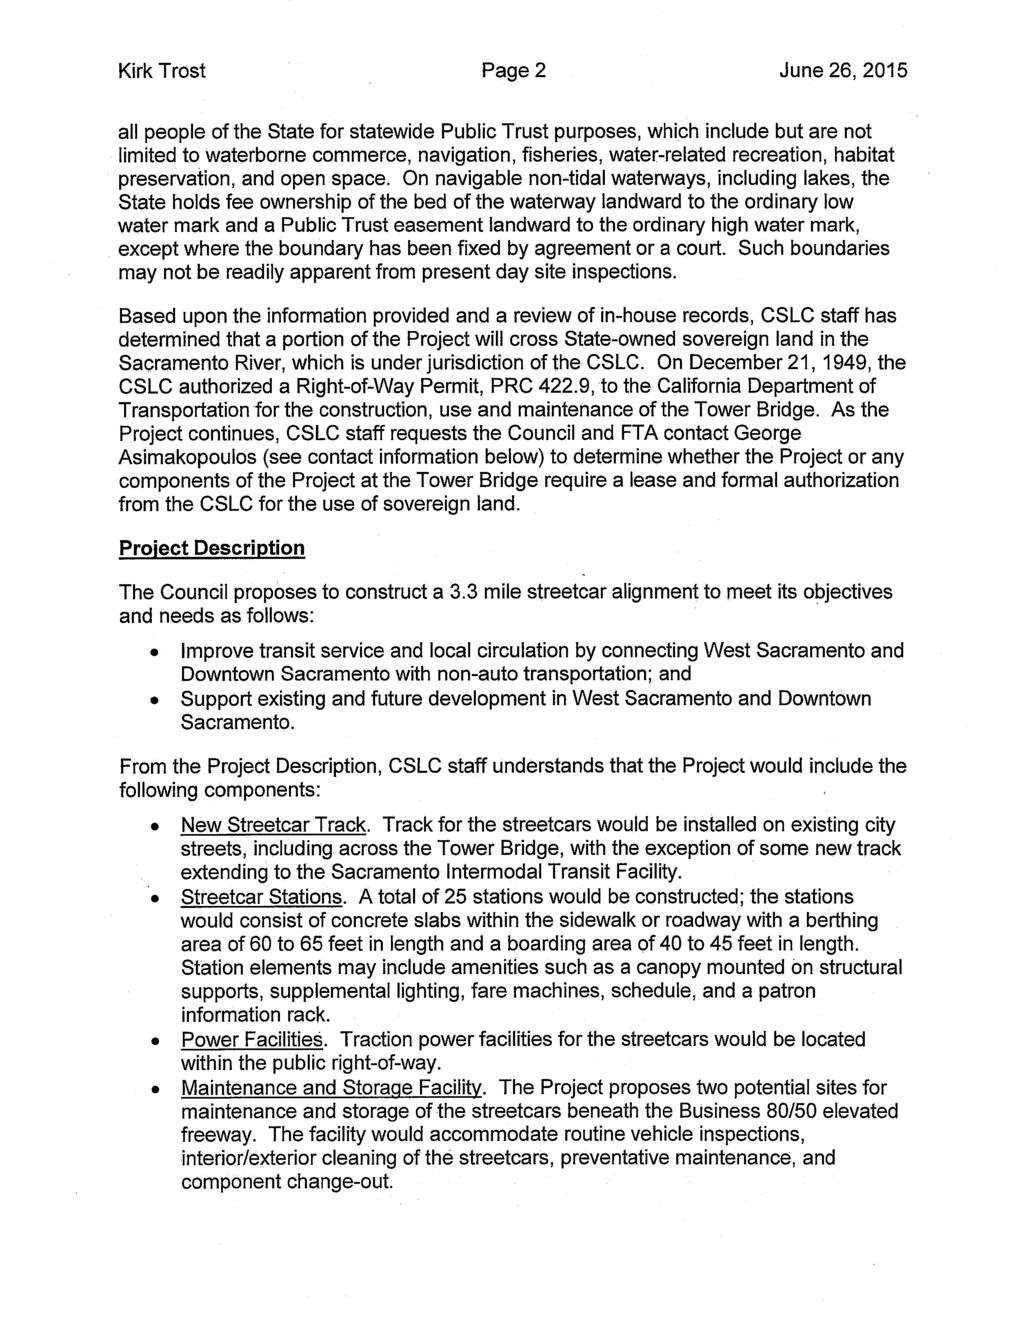 LETTER 7 - CALIFORNIA STATE LANDS COMMISSION Kirk Trost Page2 June 26, 2015 all people of the State for statewide Public Trust purposes, which include but are not limited to waterborne commerce,